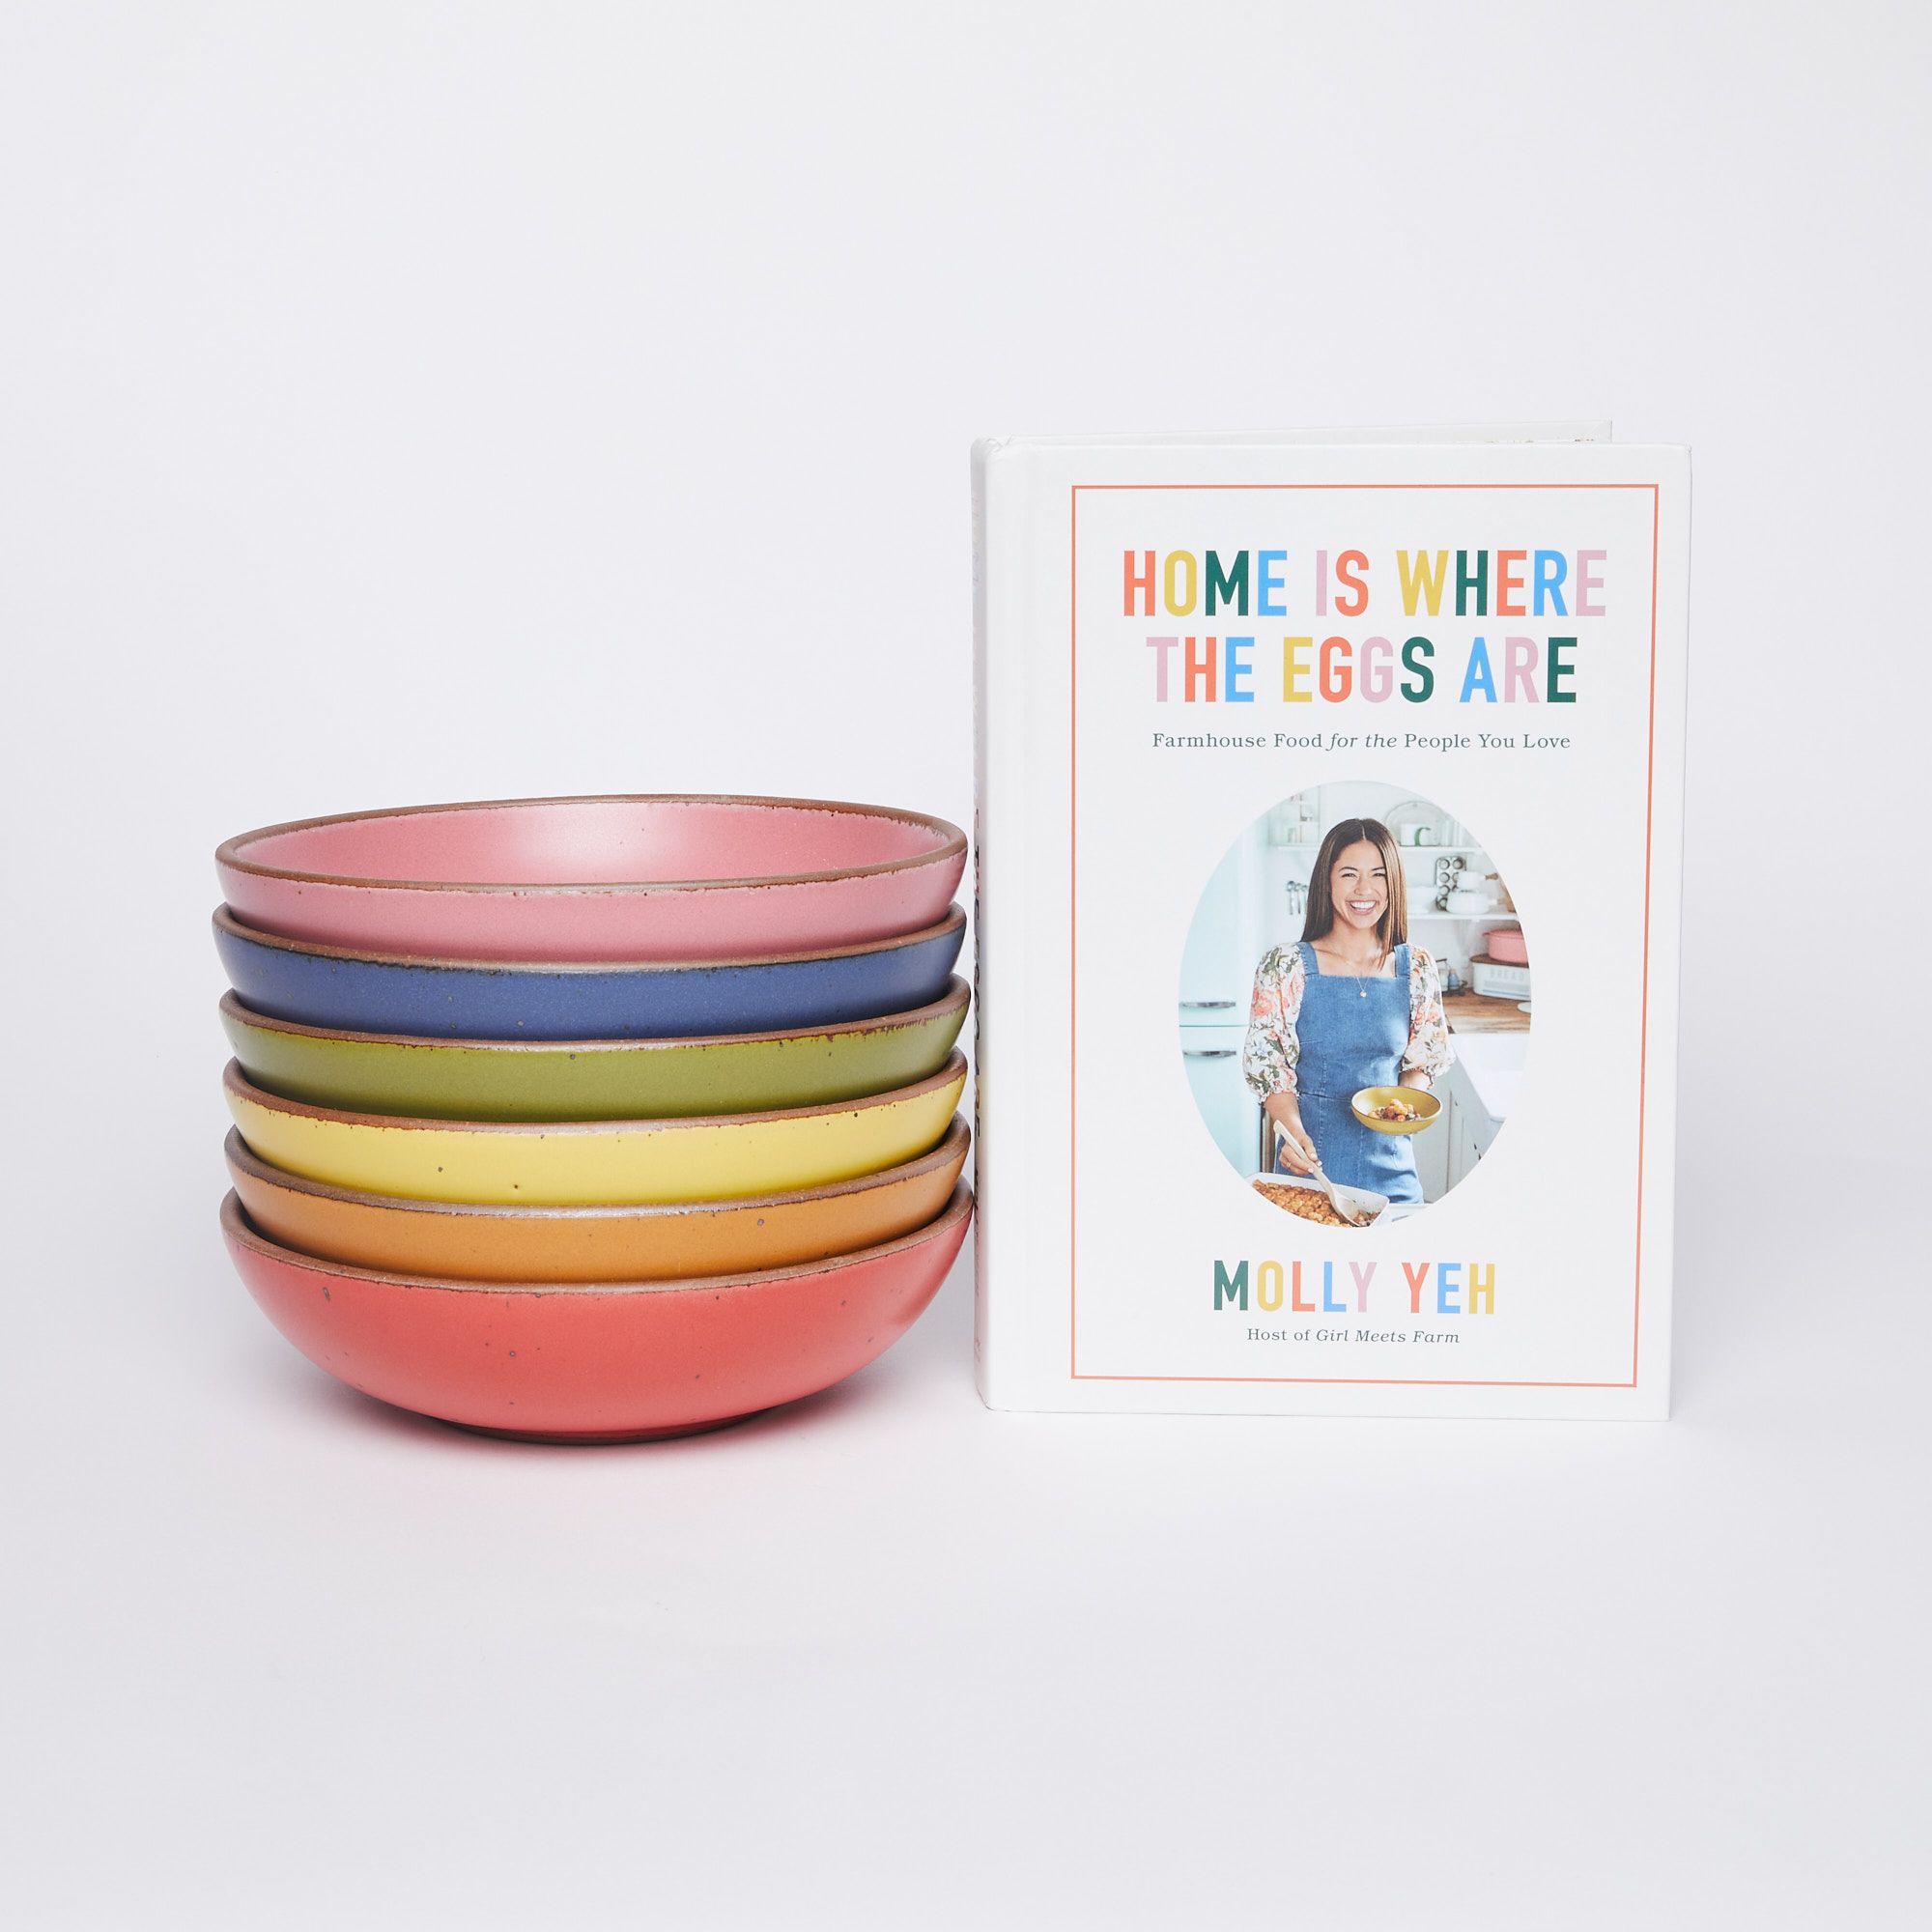 Cookbook next to stack of everyday bowls, from bottom to top - red, orange, yellow, green, blue, pink